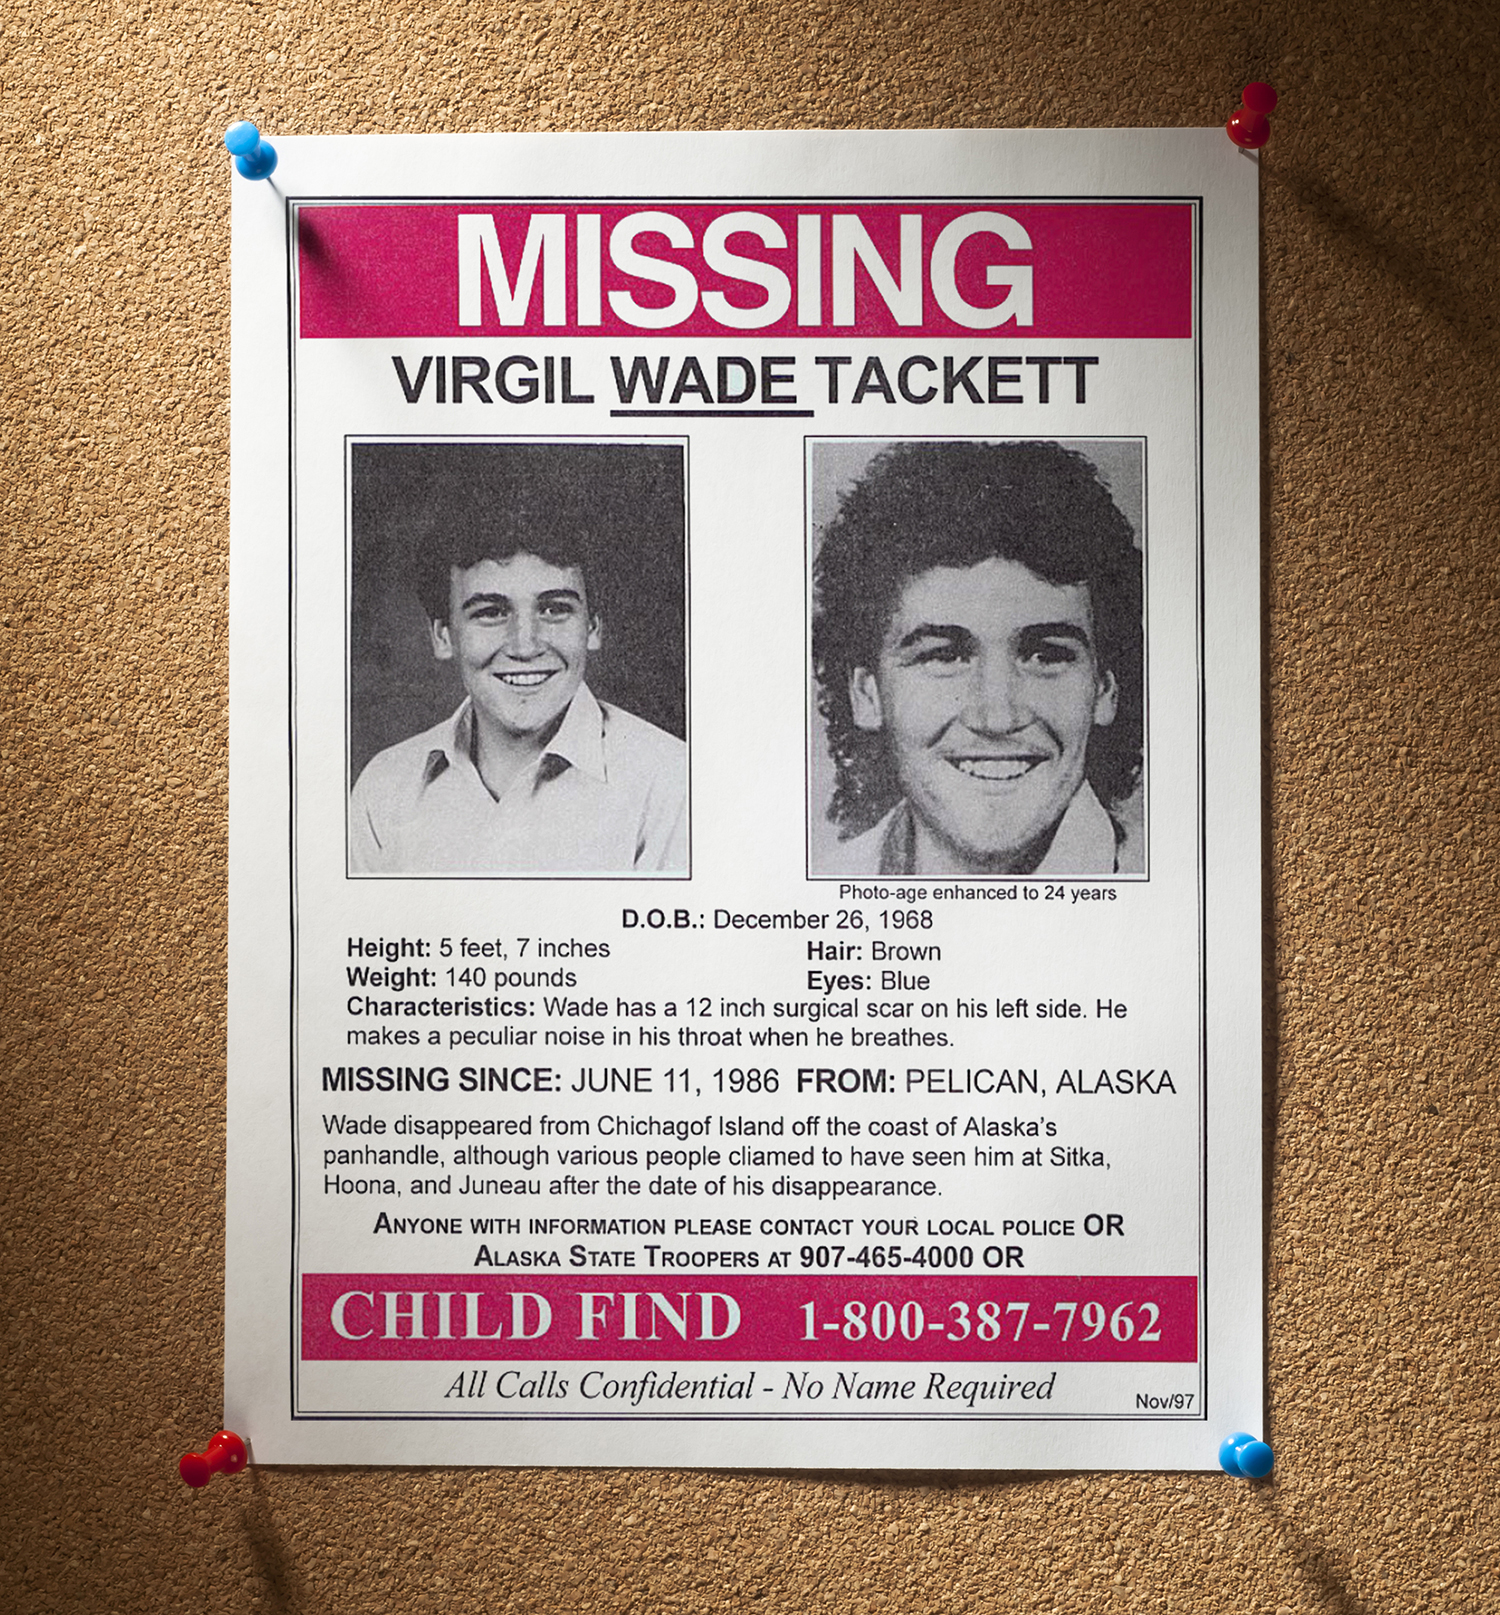 The poster of Wade Tackett from the Alaska State Troopers Active Missing Persons Bulletins web page.